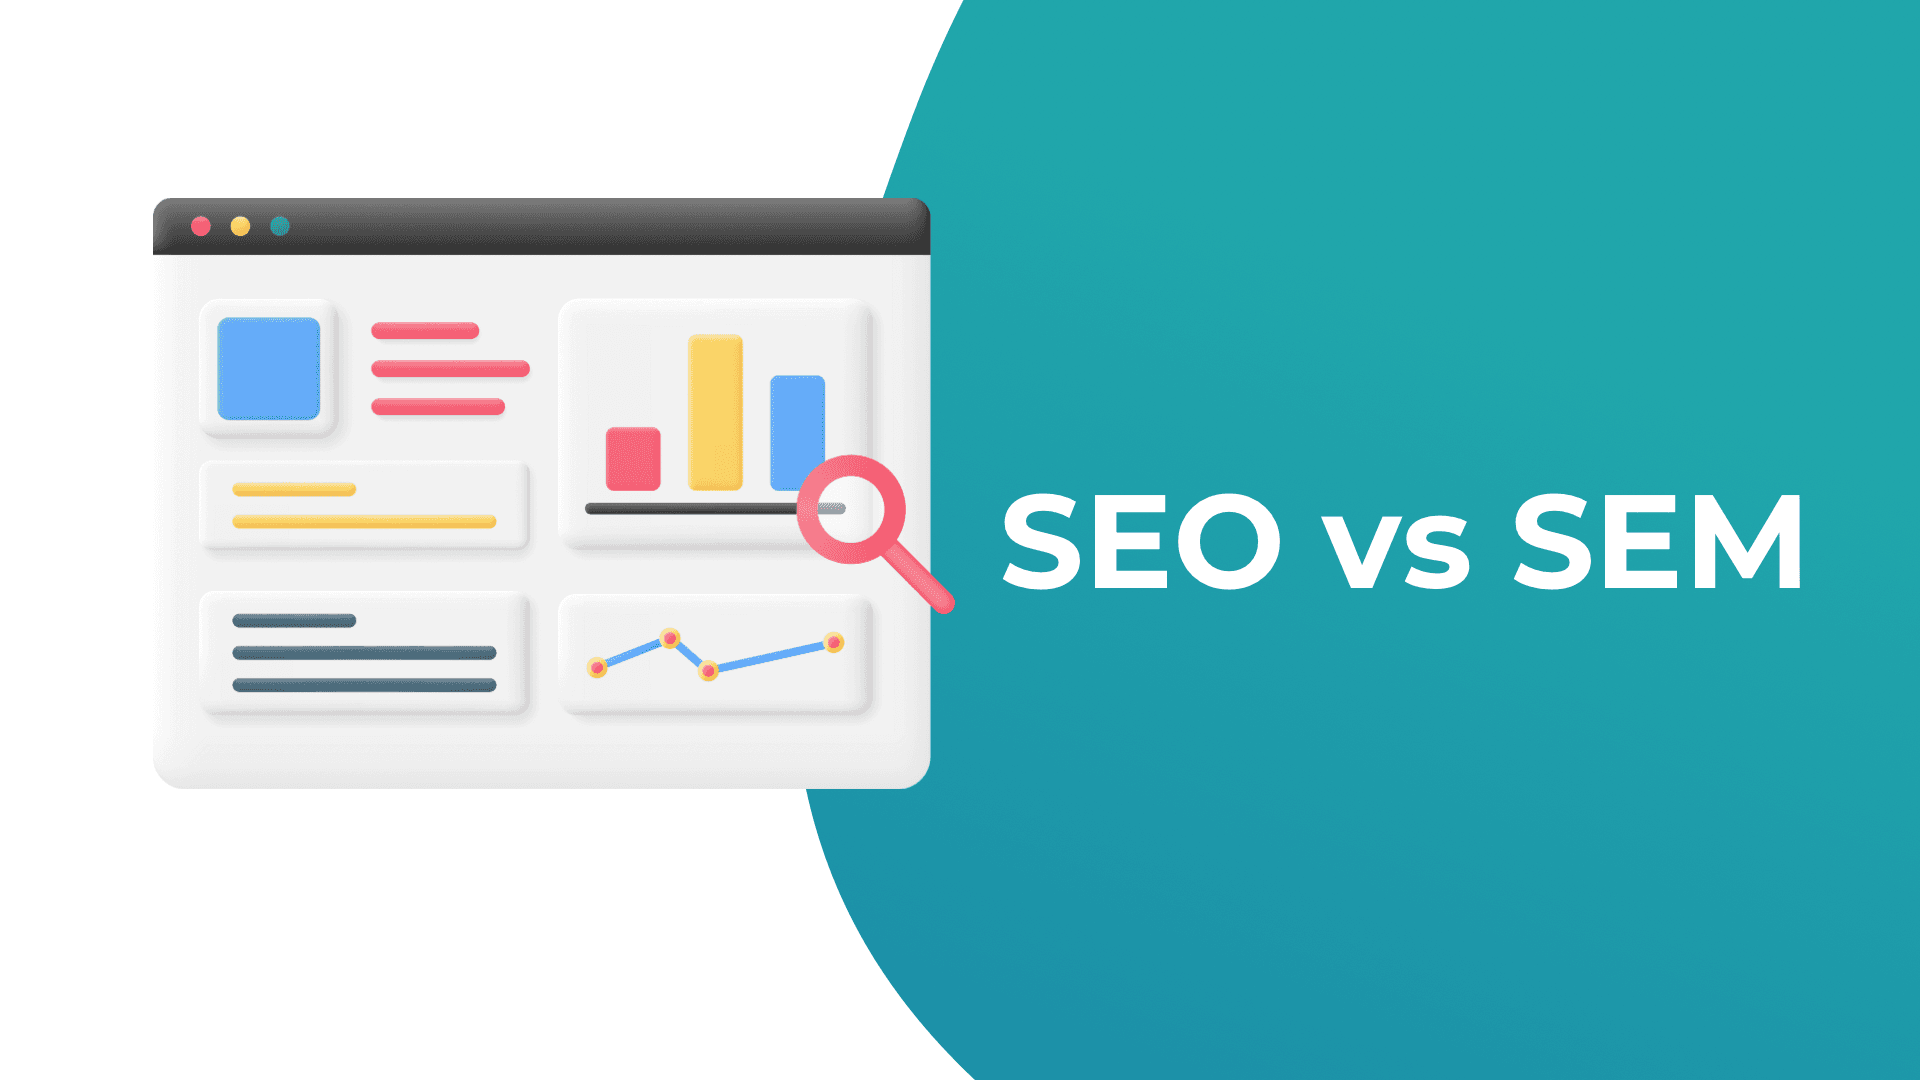 Key differences between SEO and SEM, and how they both can benefit your business.